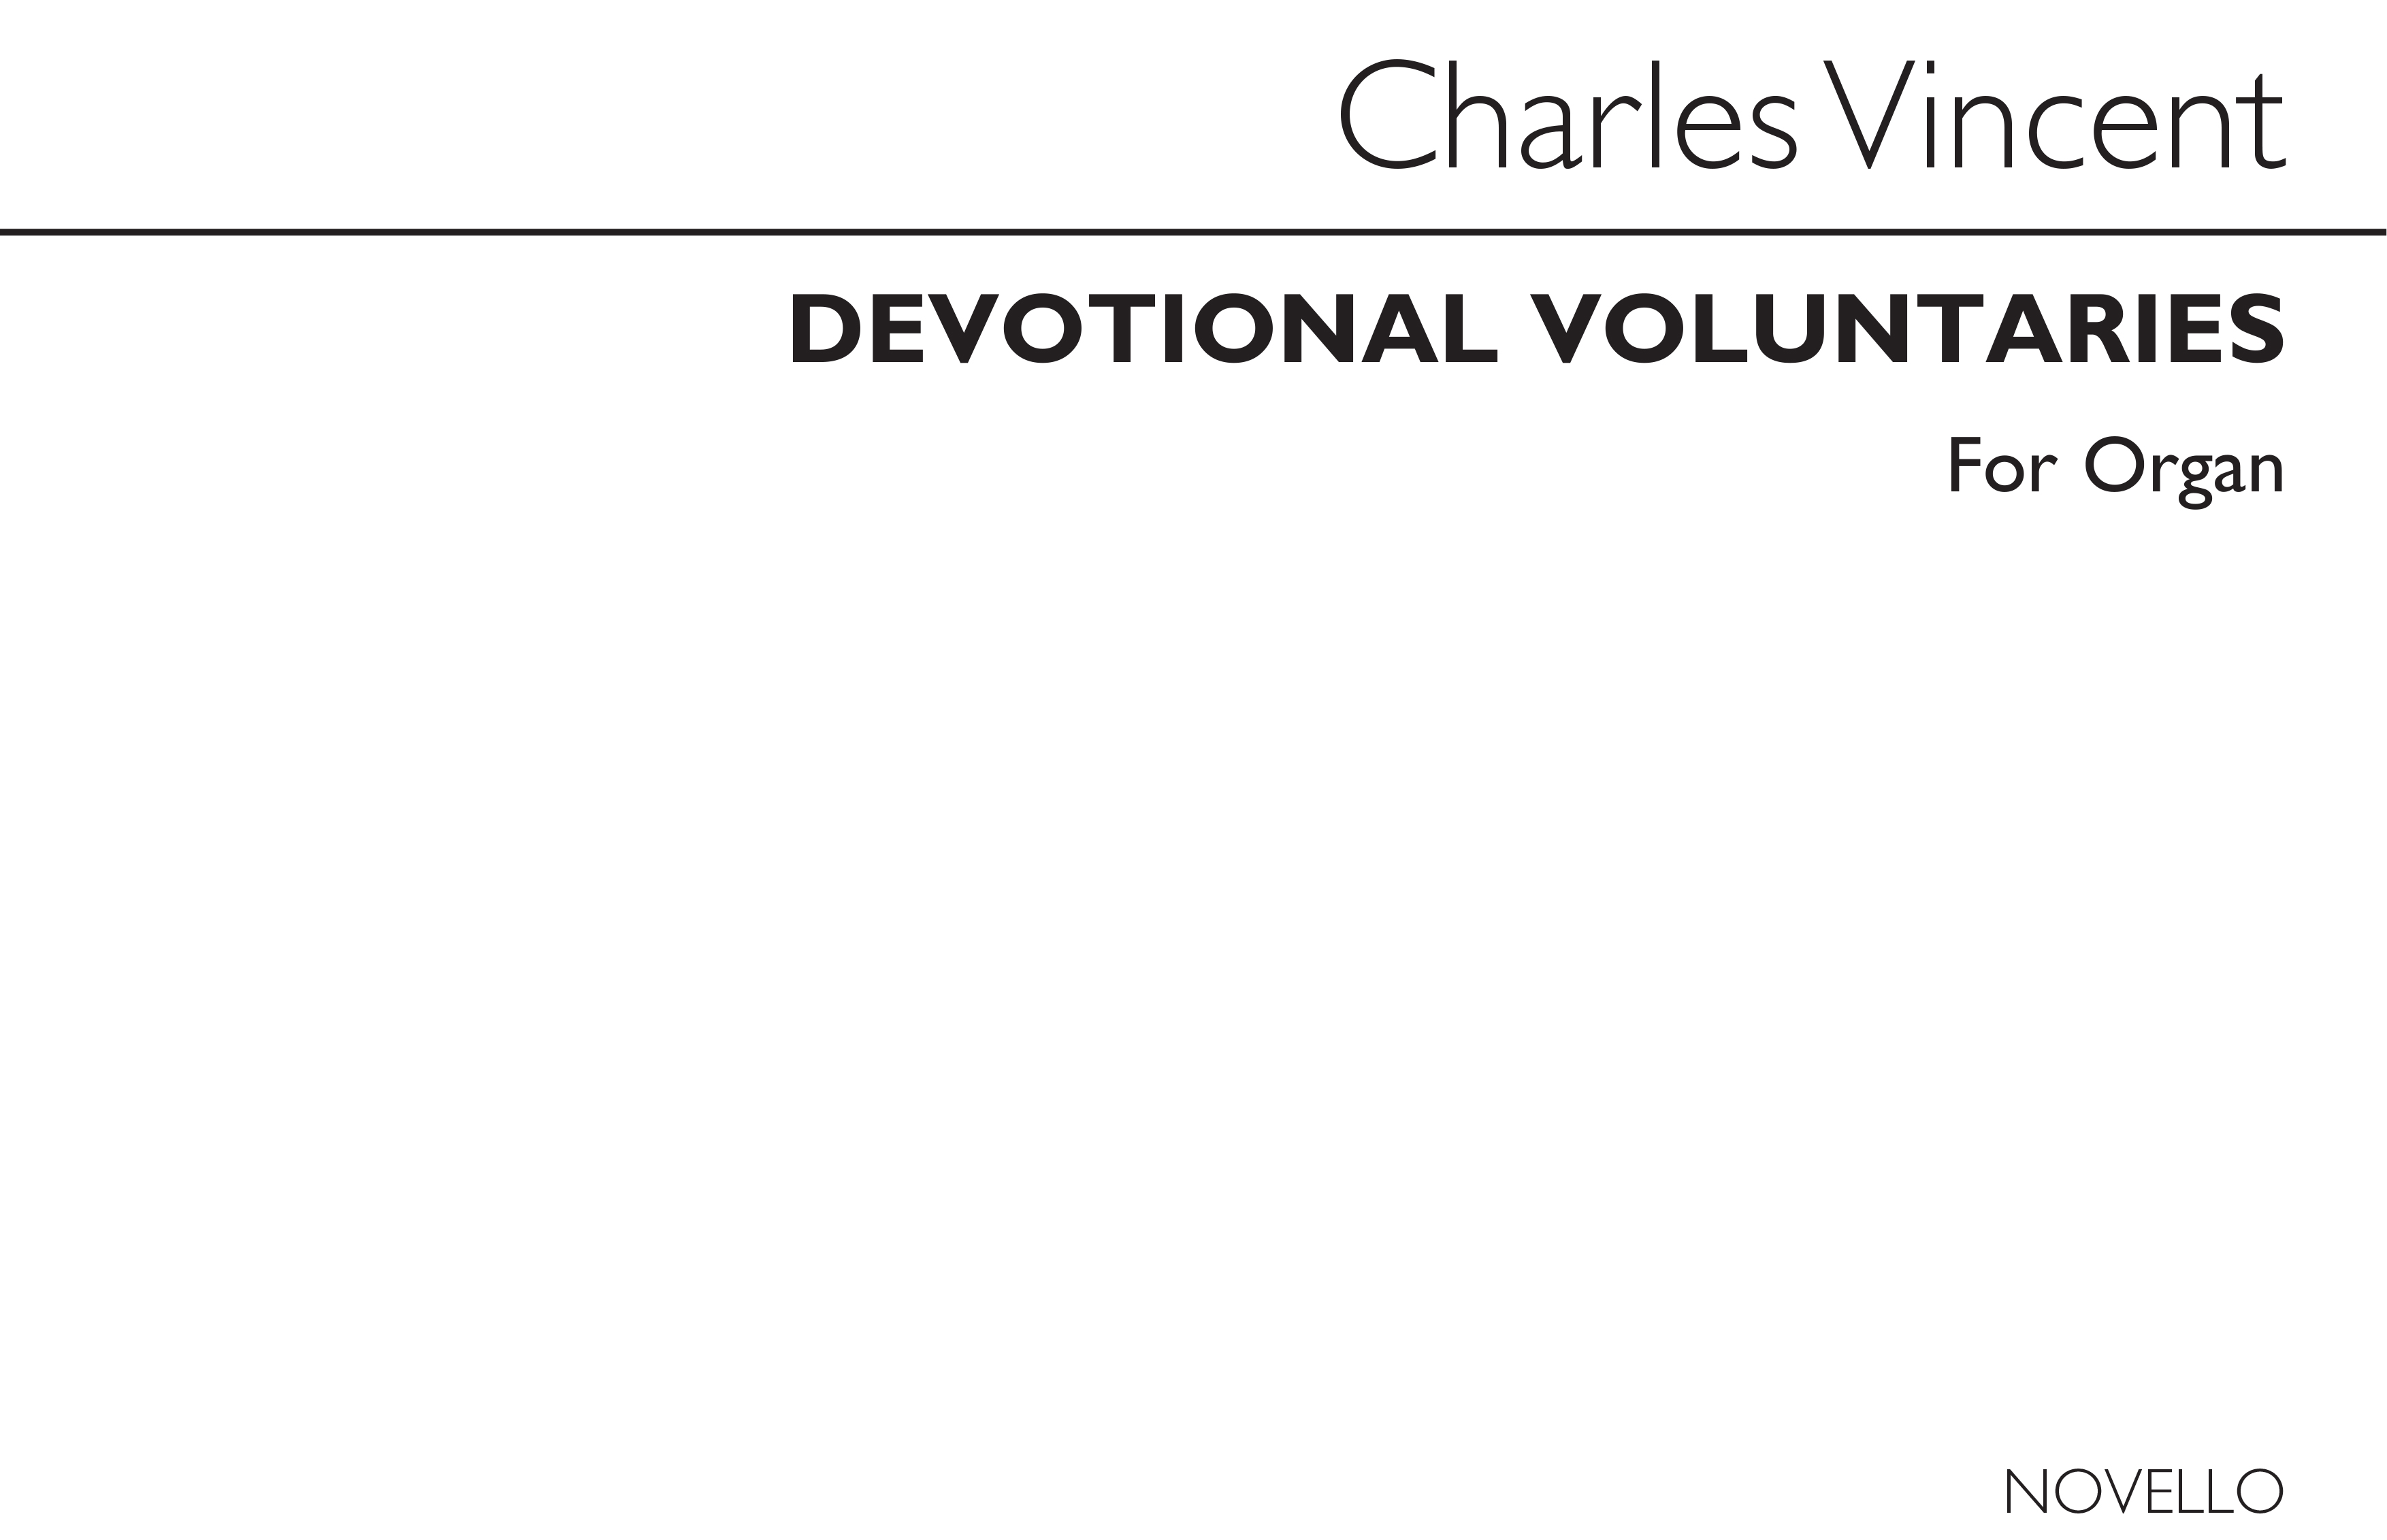 Vincent, C Devotional Voluntaries Book 1 For Organ (Three Stave)